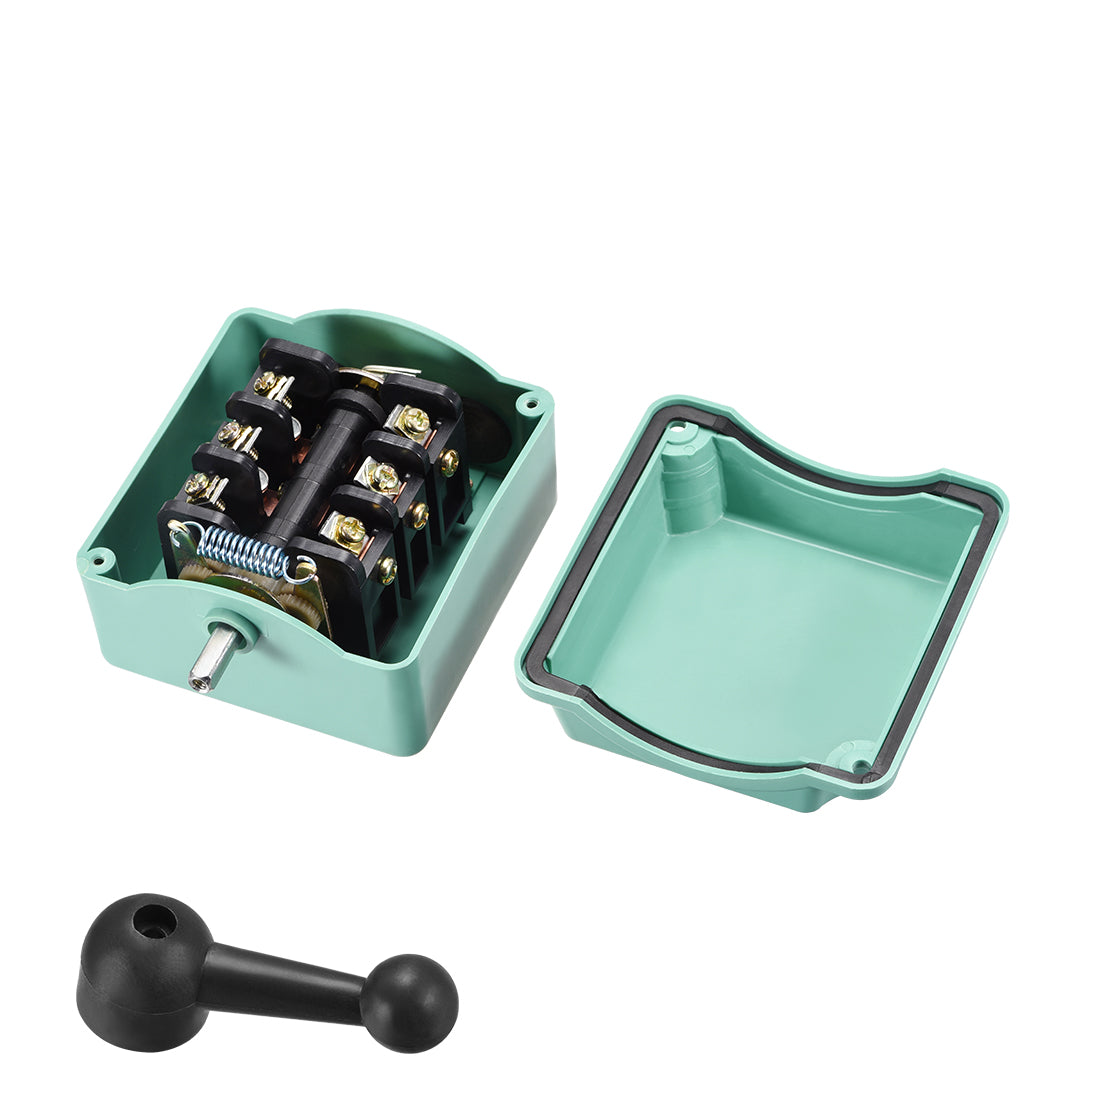 uxcell Uxcell Drum Switch QS-15 3 Positon Forward/Off/Reverse Motor Control Plastic Shell 15A